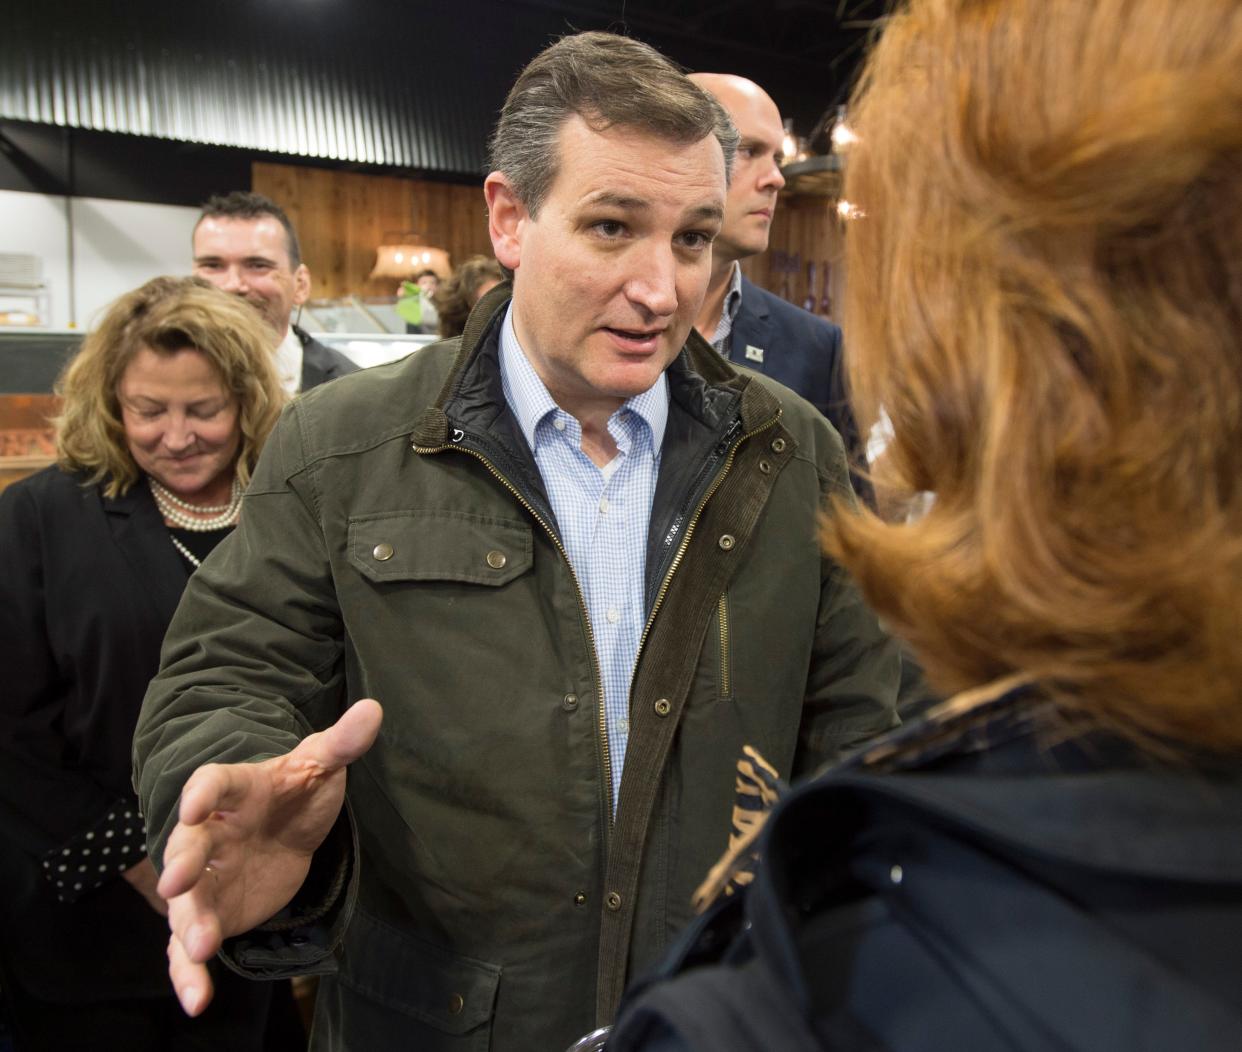 Ted Cruz, candidate for the Republican nomination for U.S. President, talks with Kristine Carlin during a campaign stop at the Wagon Wheel restaurant in Bloomington on May 2, 2016. He suspended his campaign the next day after losing the Indiana primary to Donald Trump. David Snodgress | Herald-Times